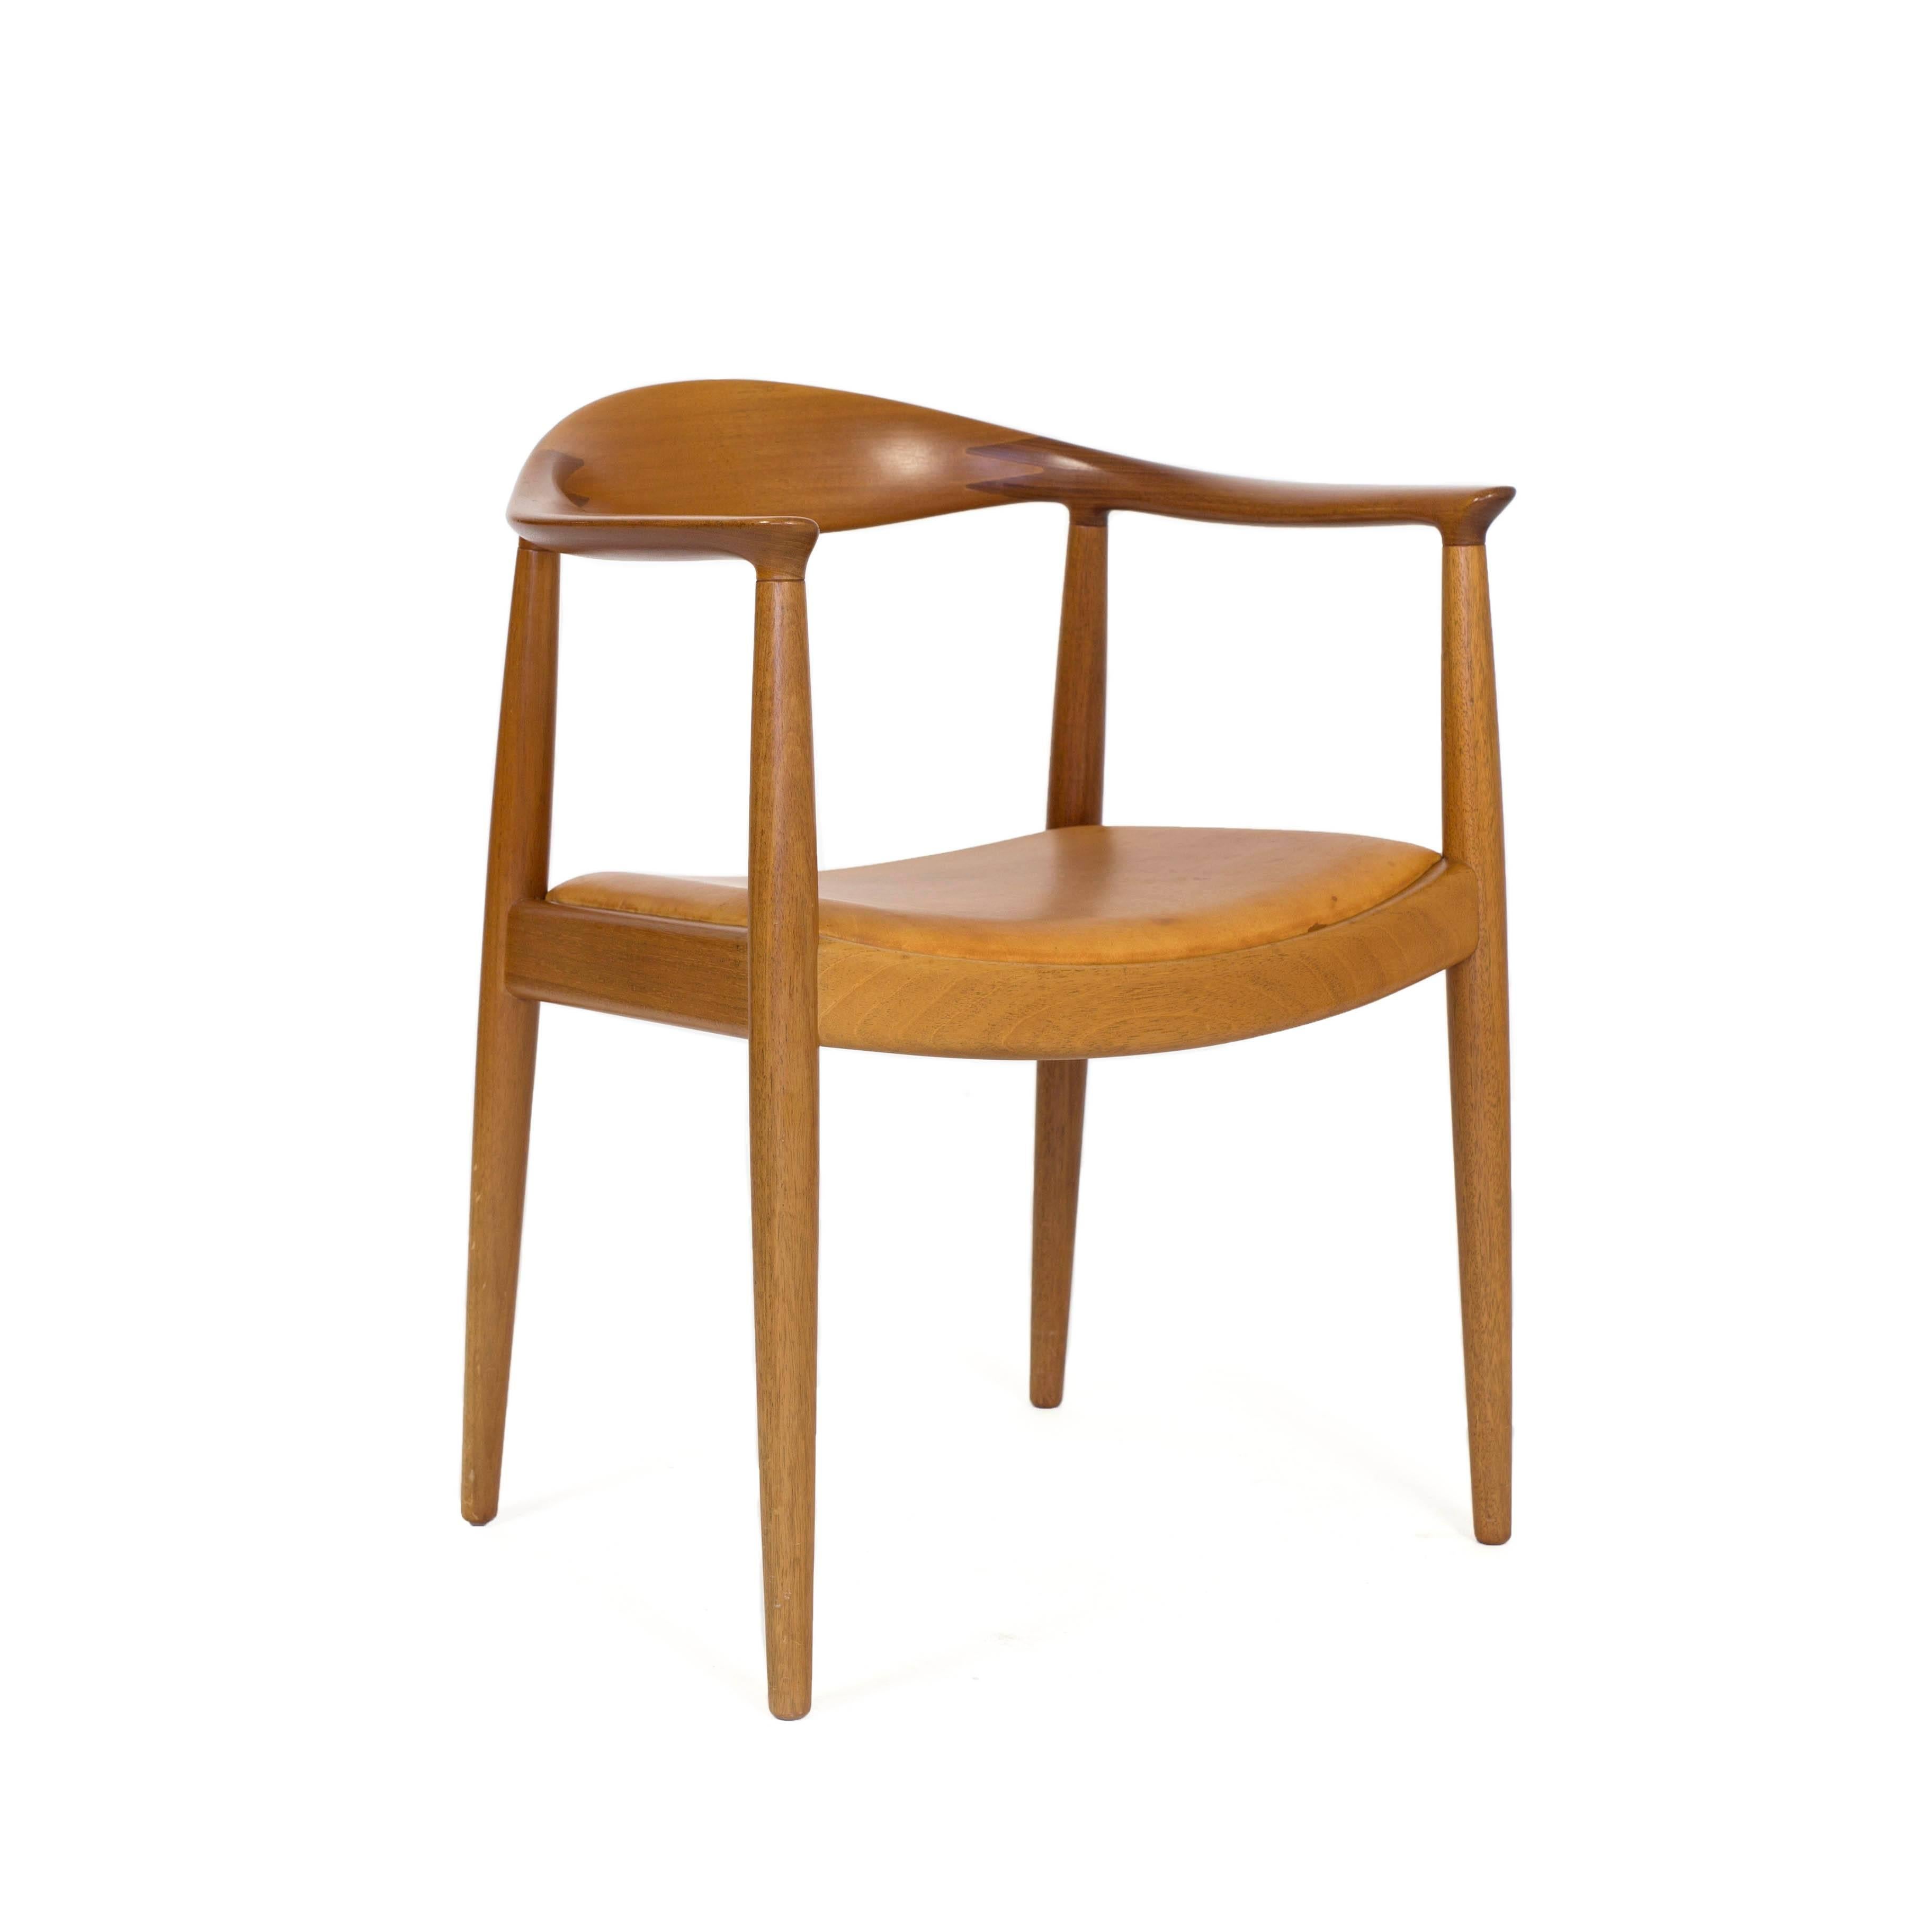 Hans J. Wegner 'The chair' with mahogany frame and seat upholstered with natural leather. 

Designed by Hans J. Wegner 1949, manufactured and marked by Cabm. Johannes Hansen, Denmark, model JH503.